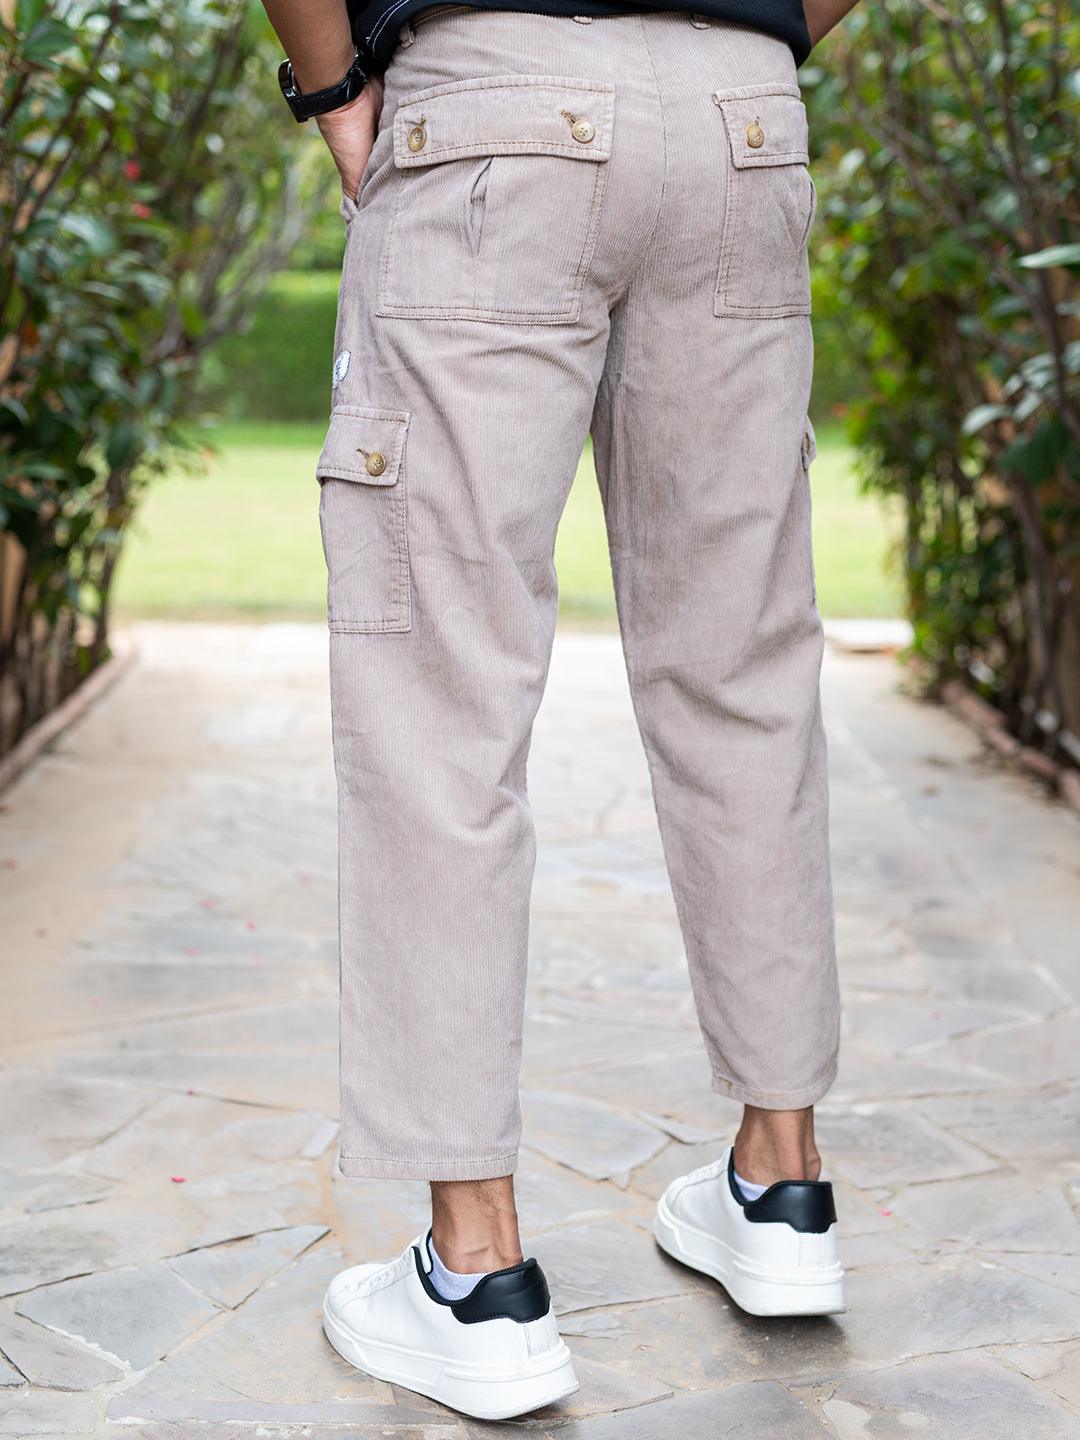 classic camel brown baggy fit corduroy cargo pants